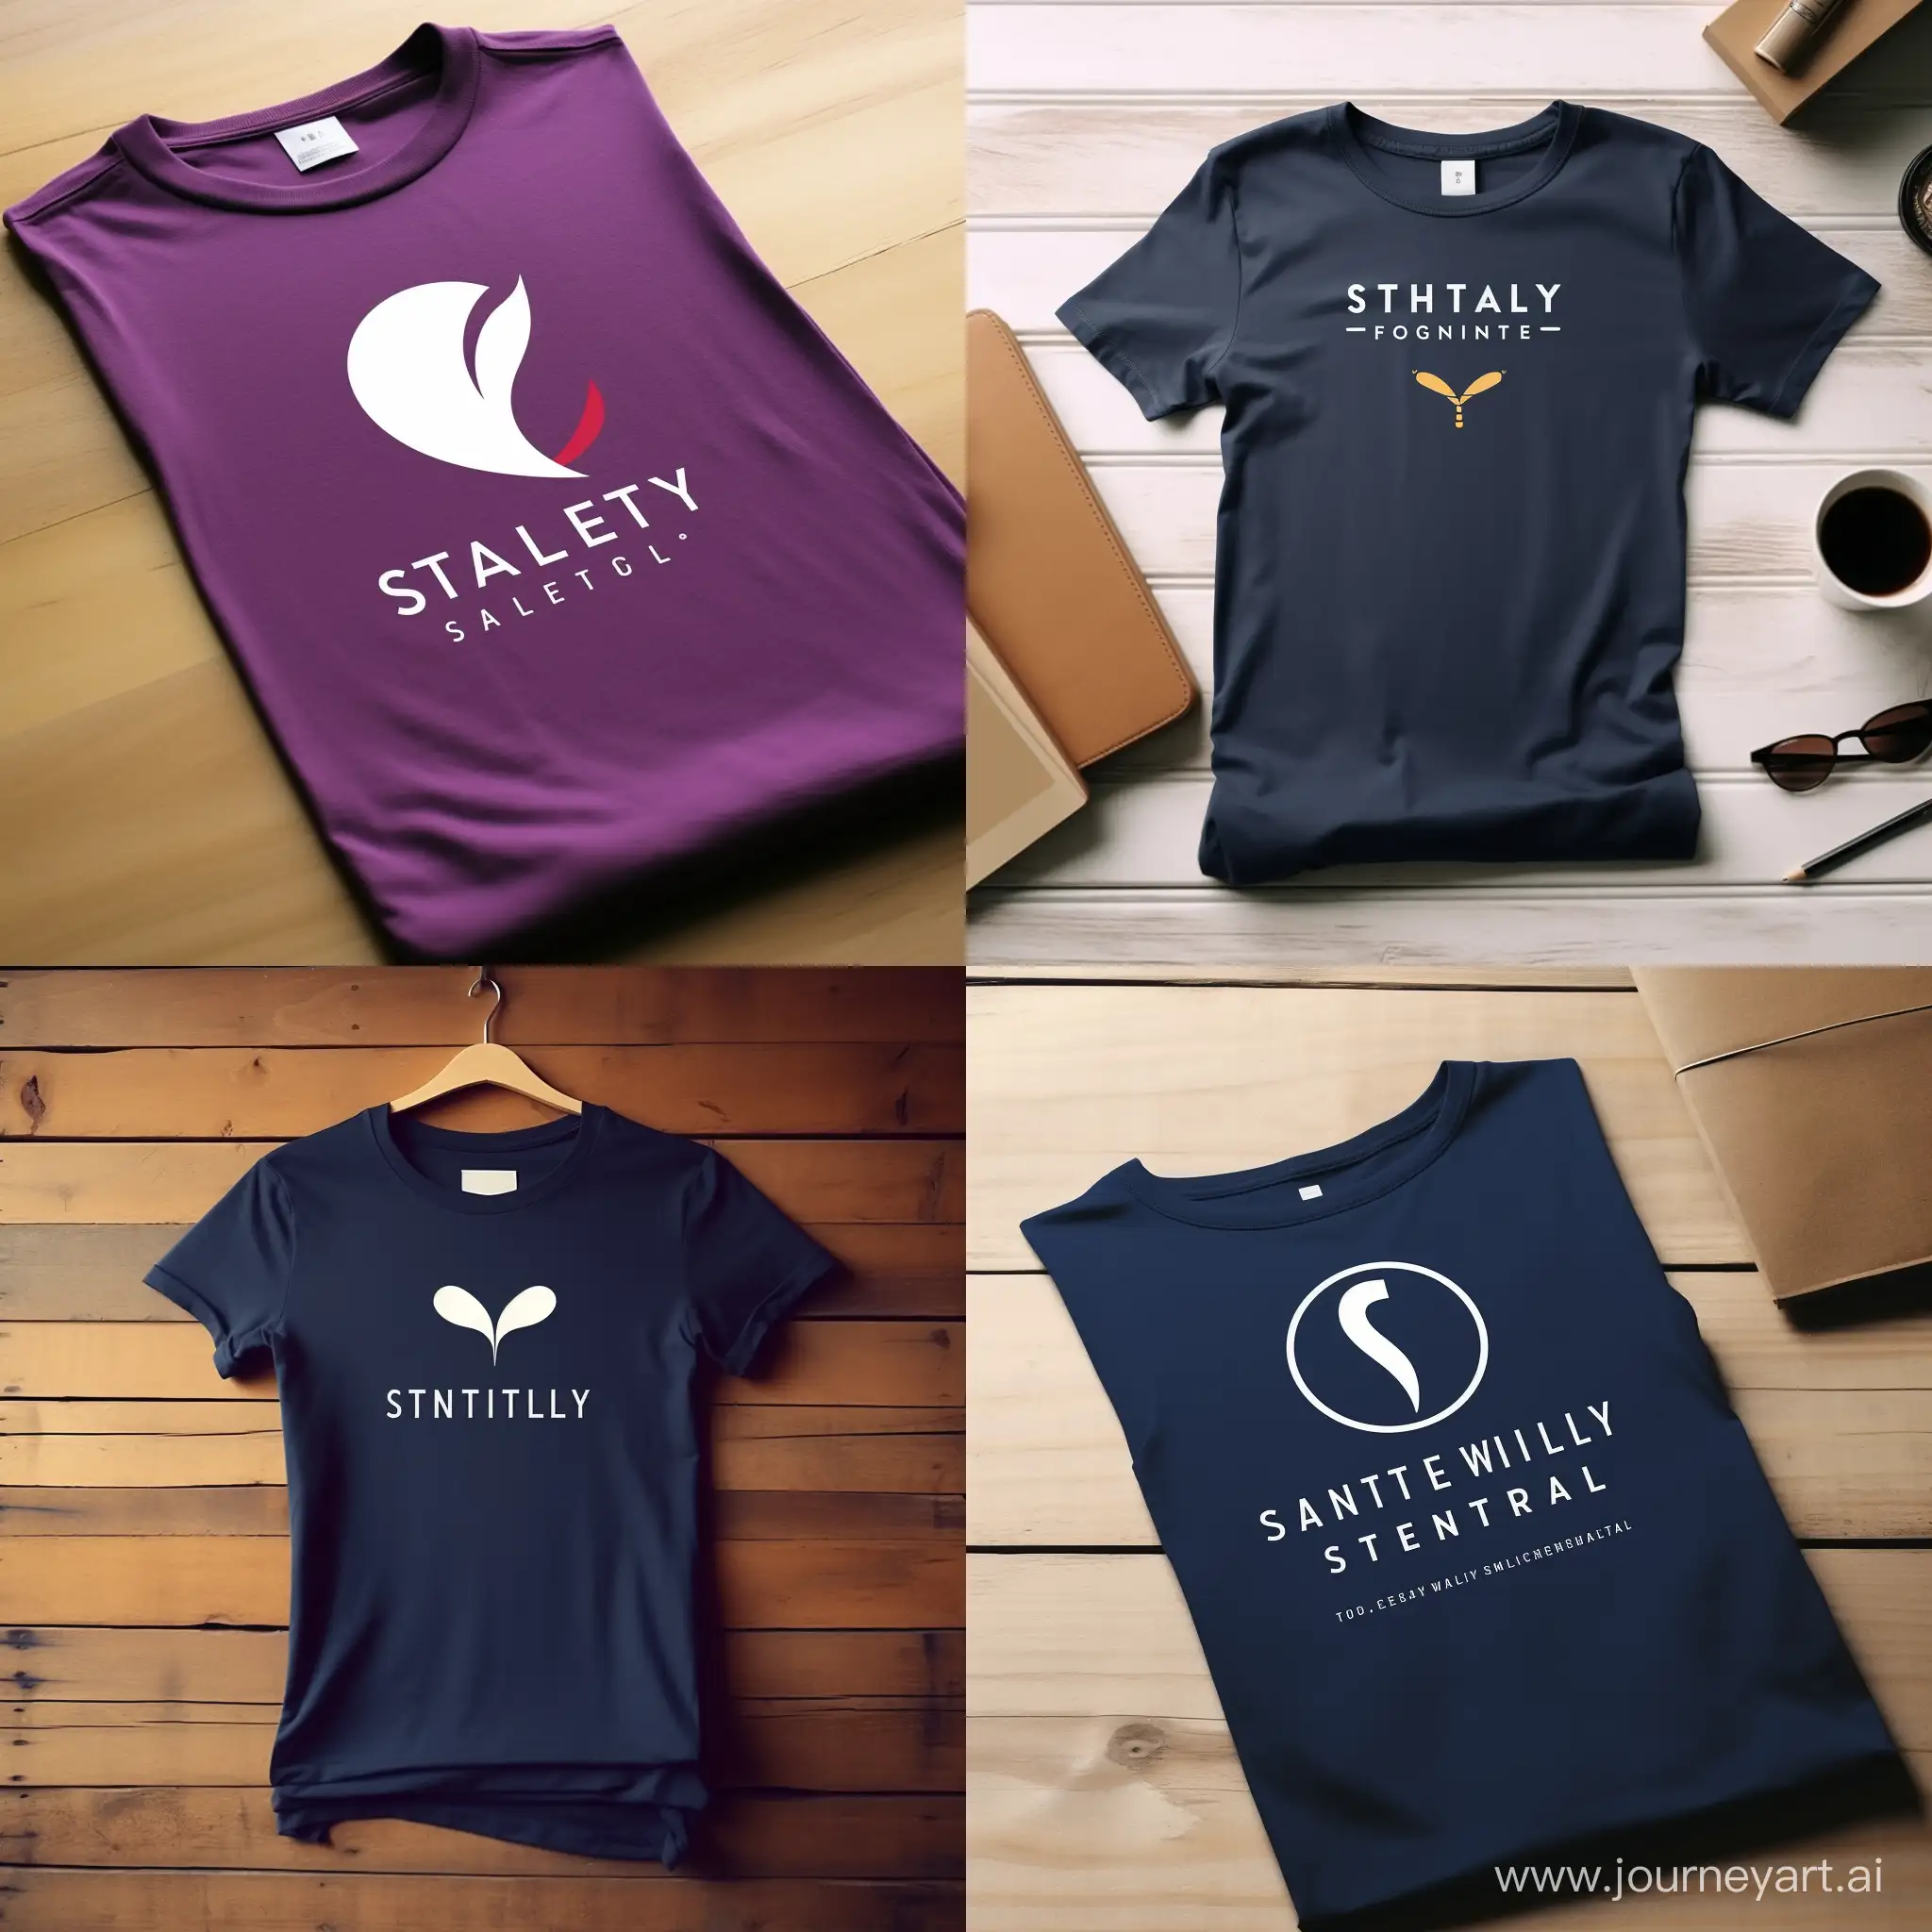 generate a logo for a start up called "Swiftly Tailored" that focusses on last mile delivery for all mens and womens apparel needsgenet up called "Swiftly Tailored" that focusses on last mile delivery for all mens and womens apparel needs